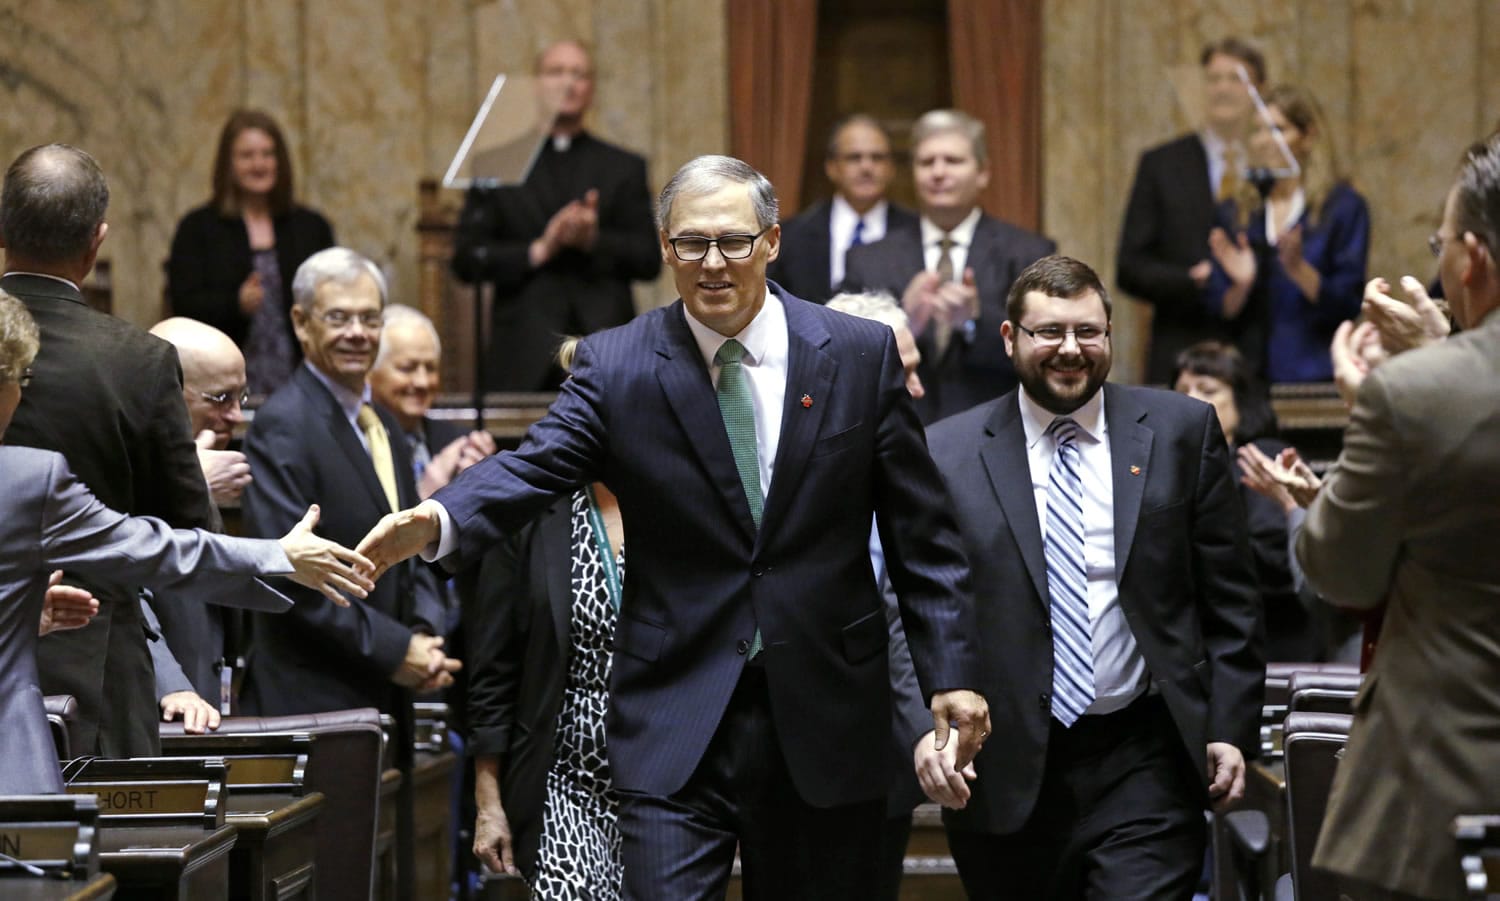 Gov. Jay Inslee shakes hands with legislators after giving his annual State of the State address Tuesday in Olympia. The address came on Day 2 of the 60-day session.